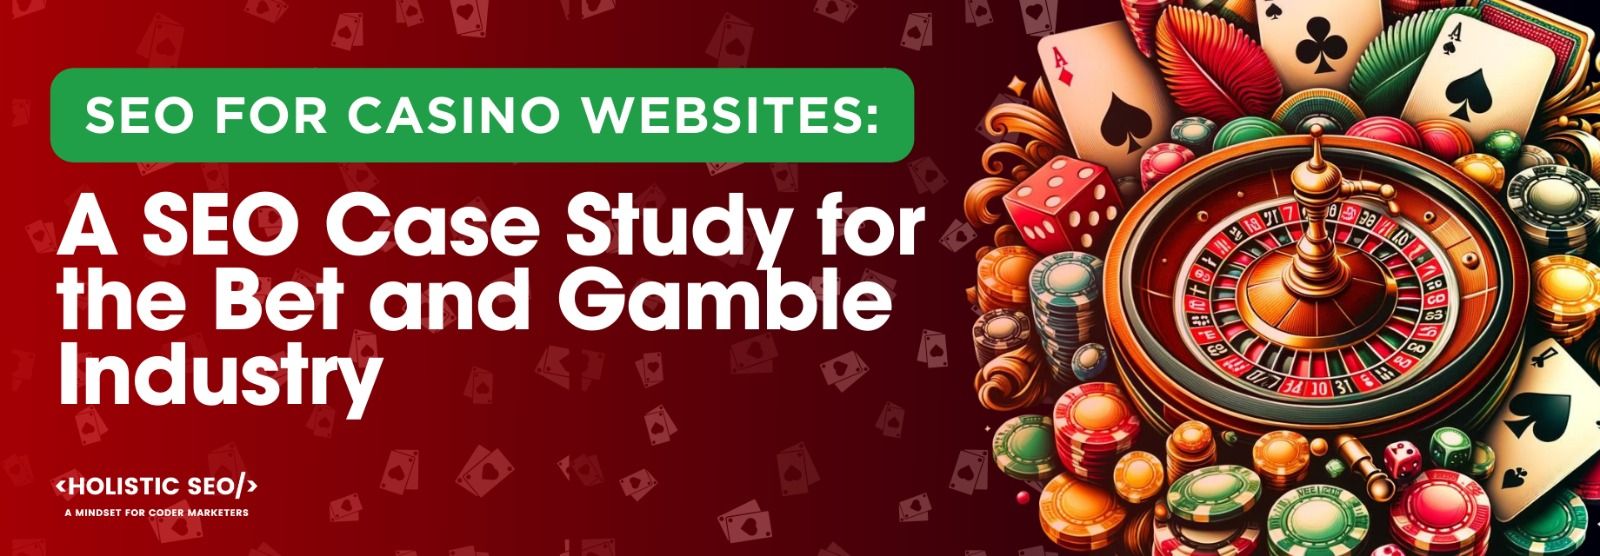 SEO-case-study-for-bet-and-gamble